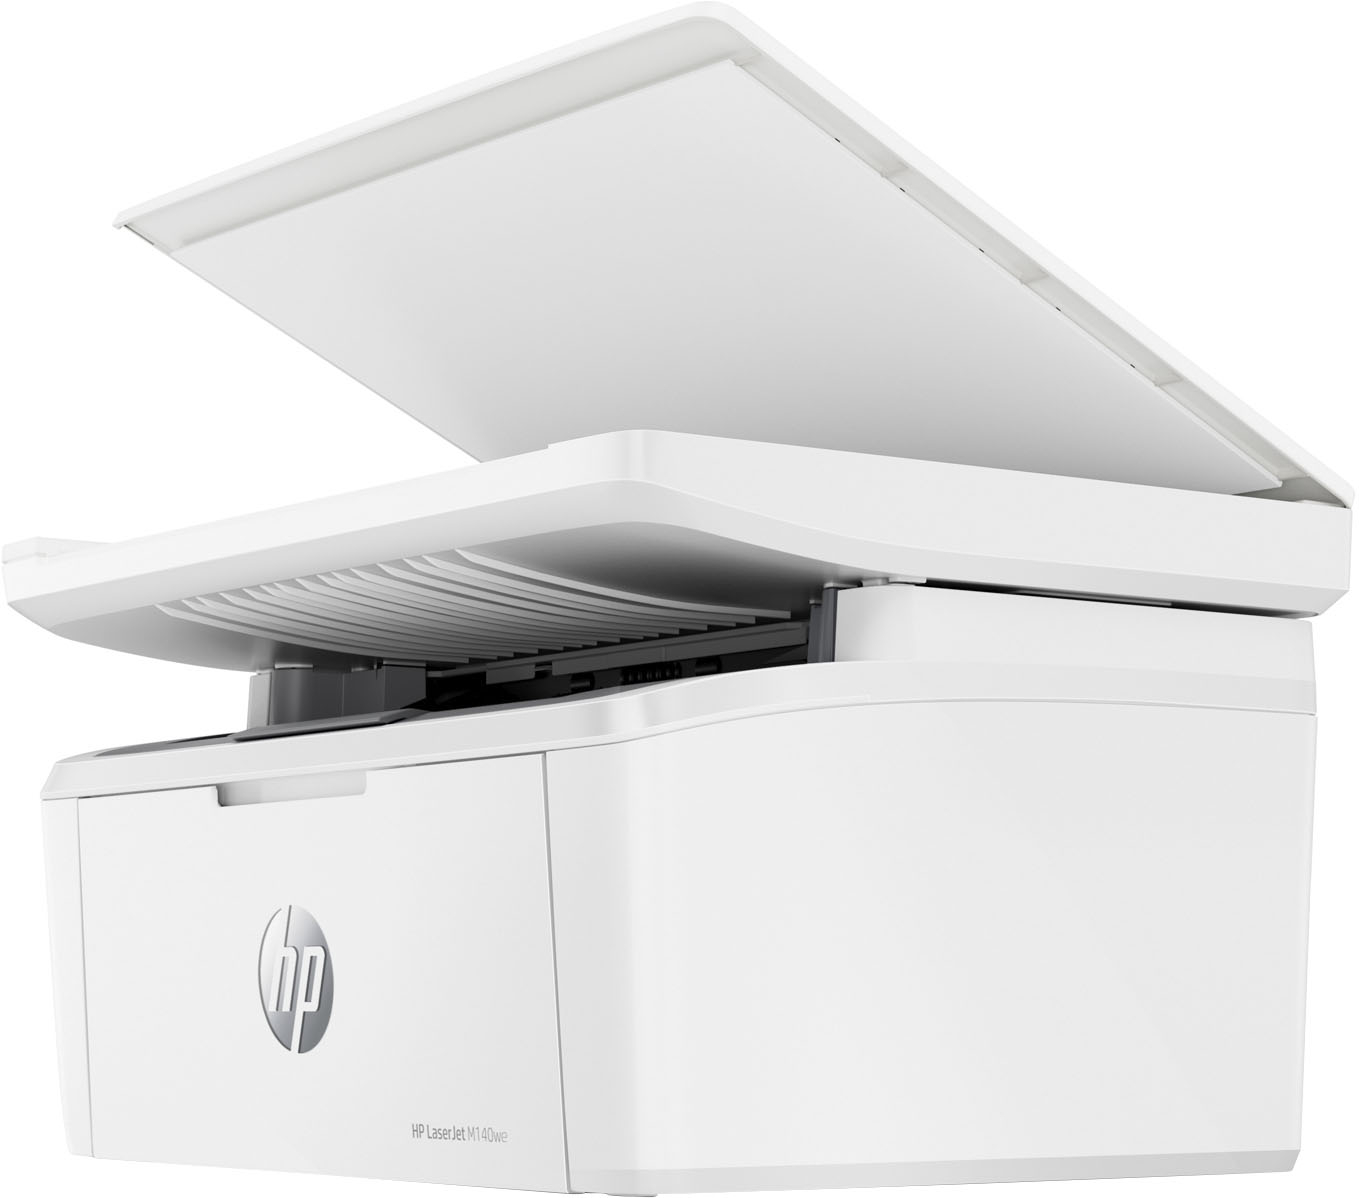 LaserJet Black White Buy LaserJet Printer White M140we and HP+ Instant M140we Laser Ink with Wireless of Best included - with months HP 6